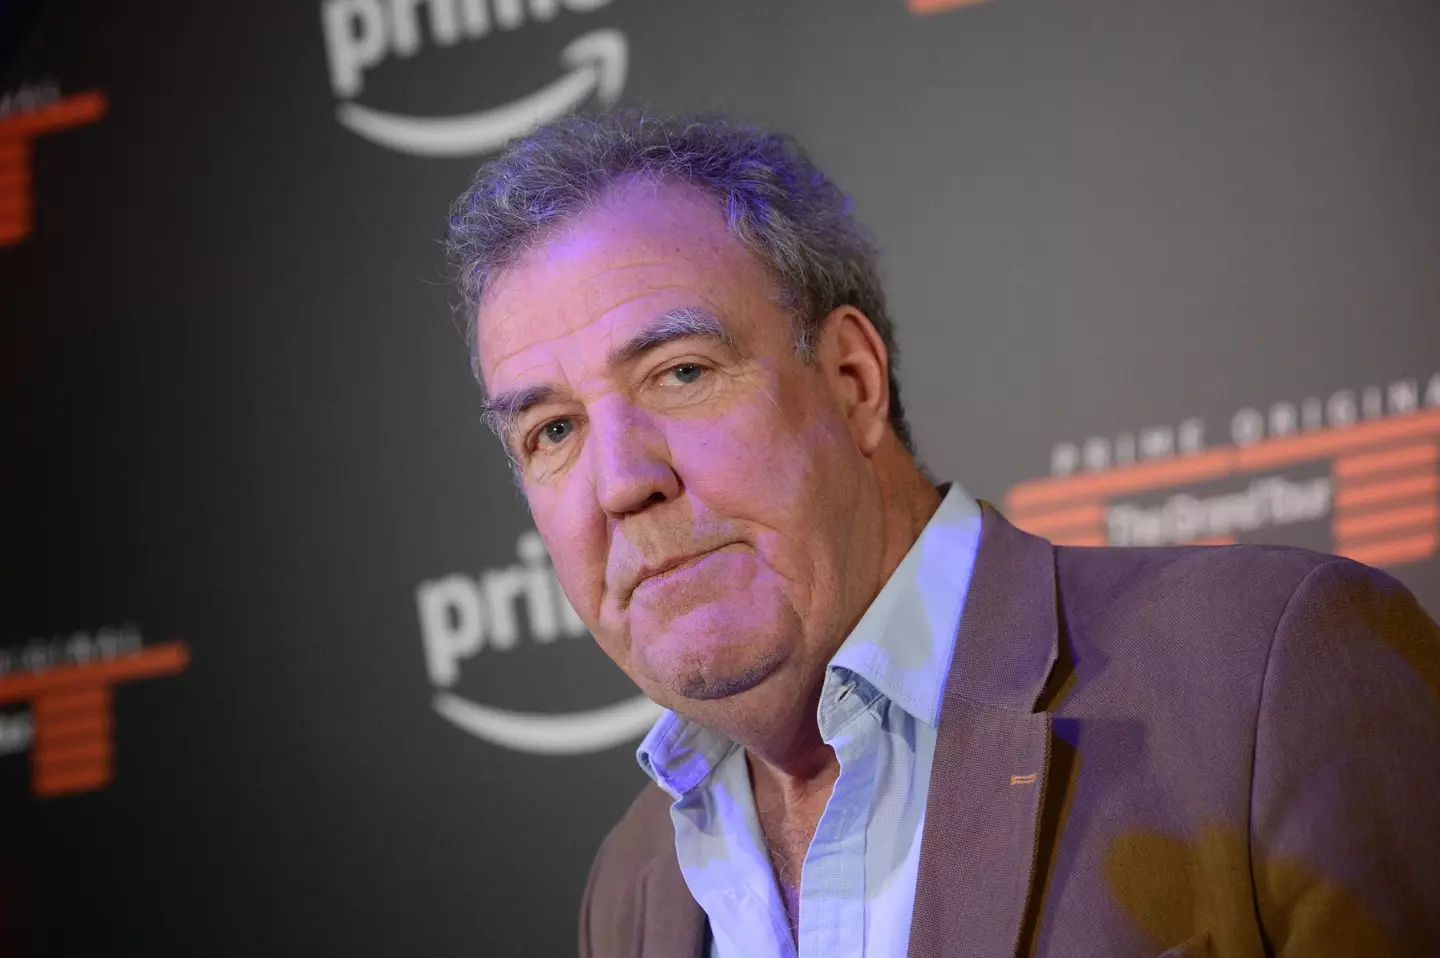 Jeremy Clarkson moved sticks to Amazon after the Top Gear sacking.